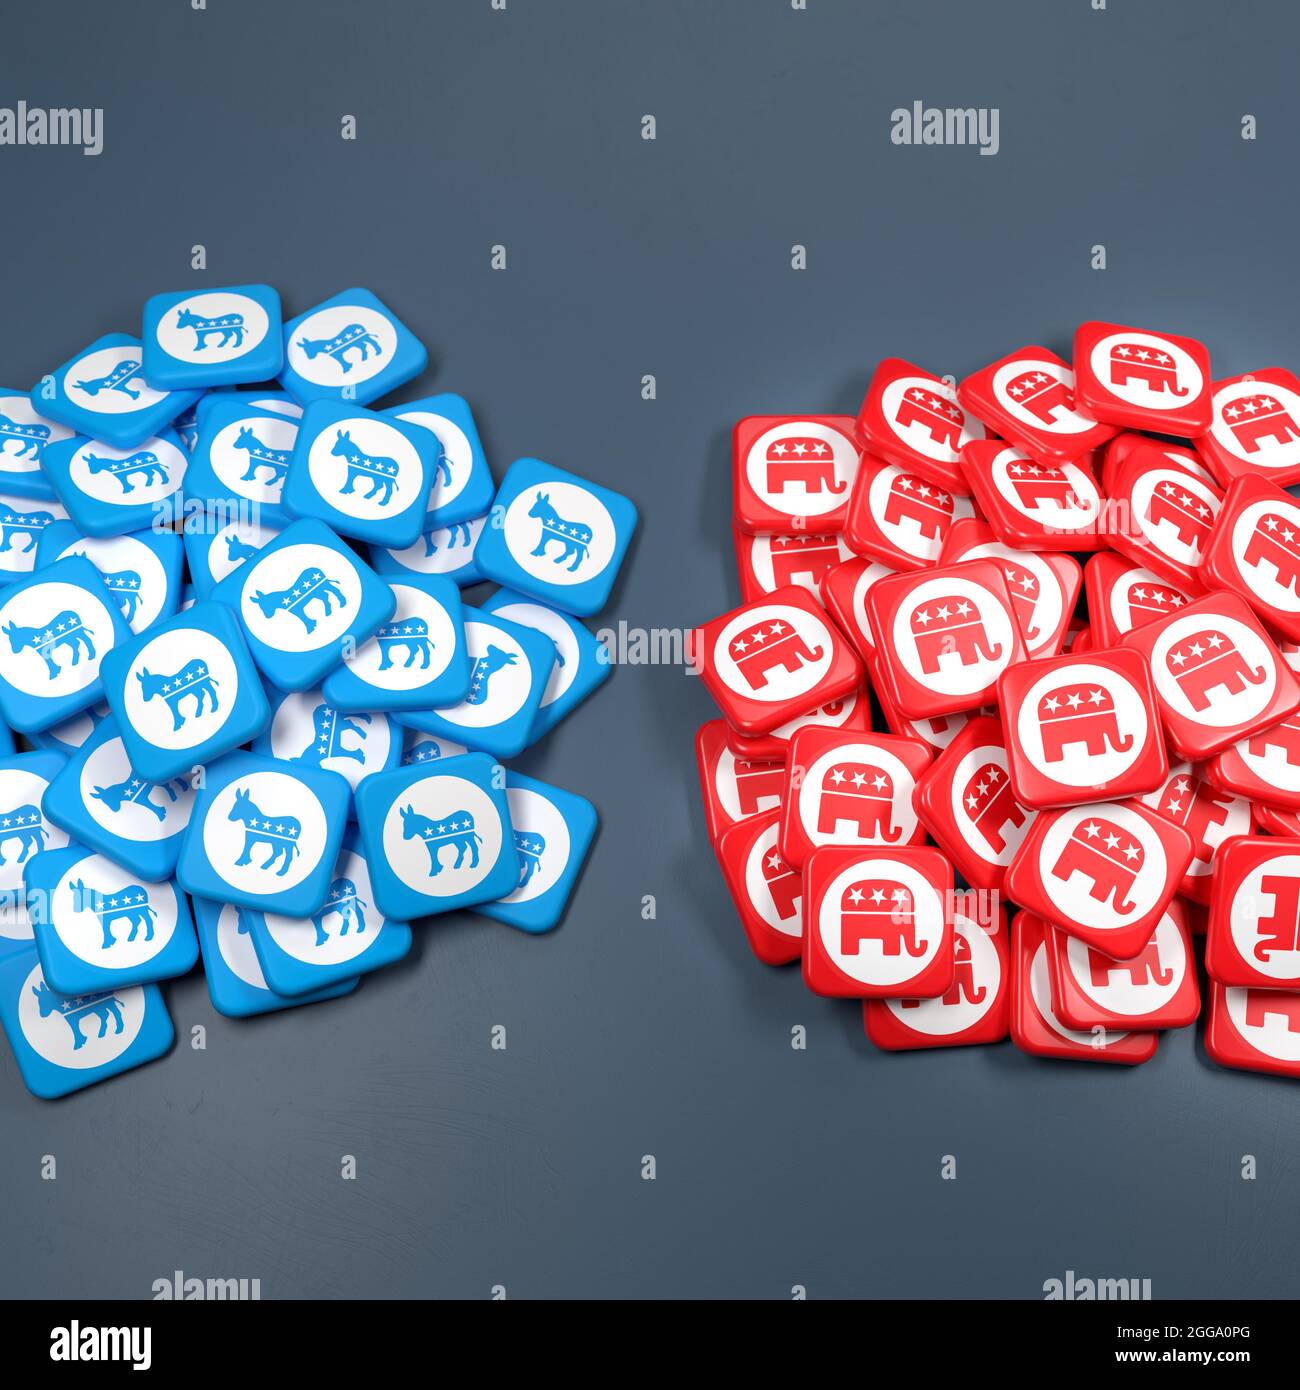 Logos of the United States Democratic Party and Republican Party on a heap on a table. Copy space. Web banner format. Stock Photo